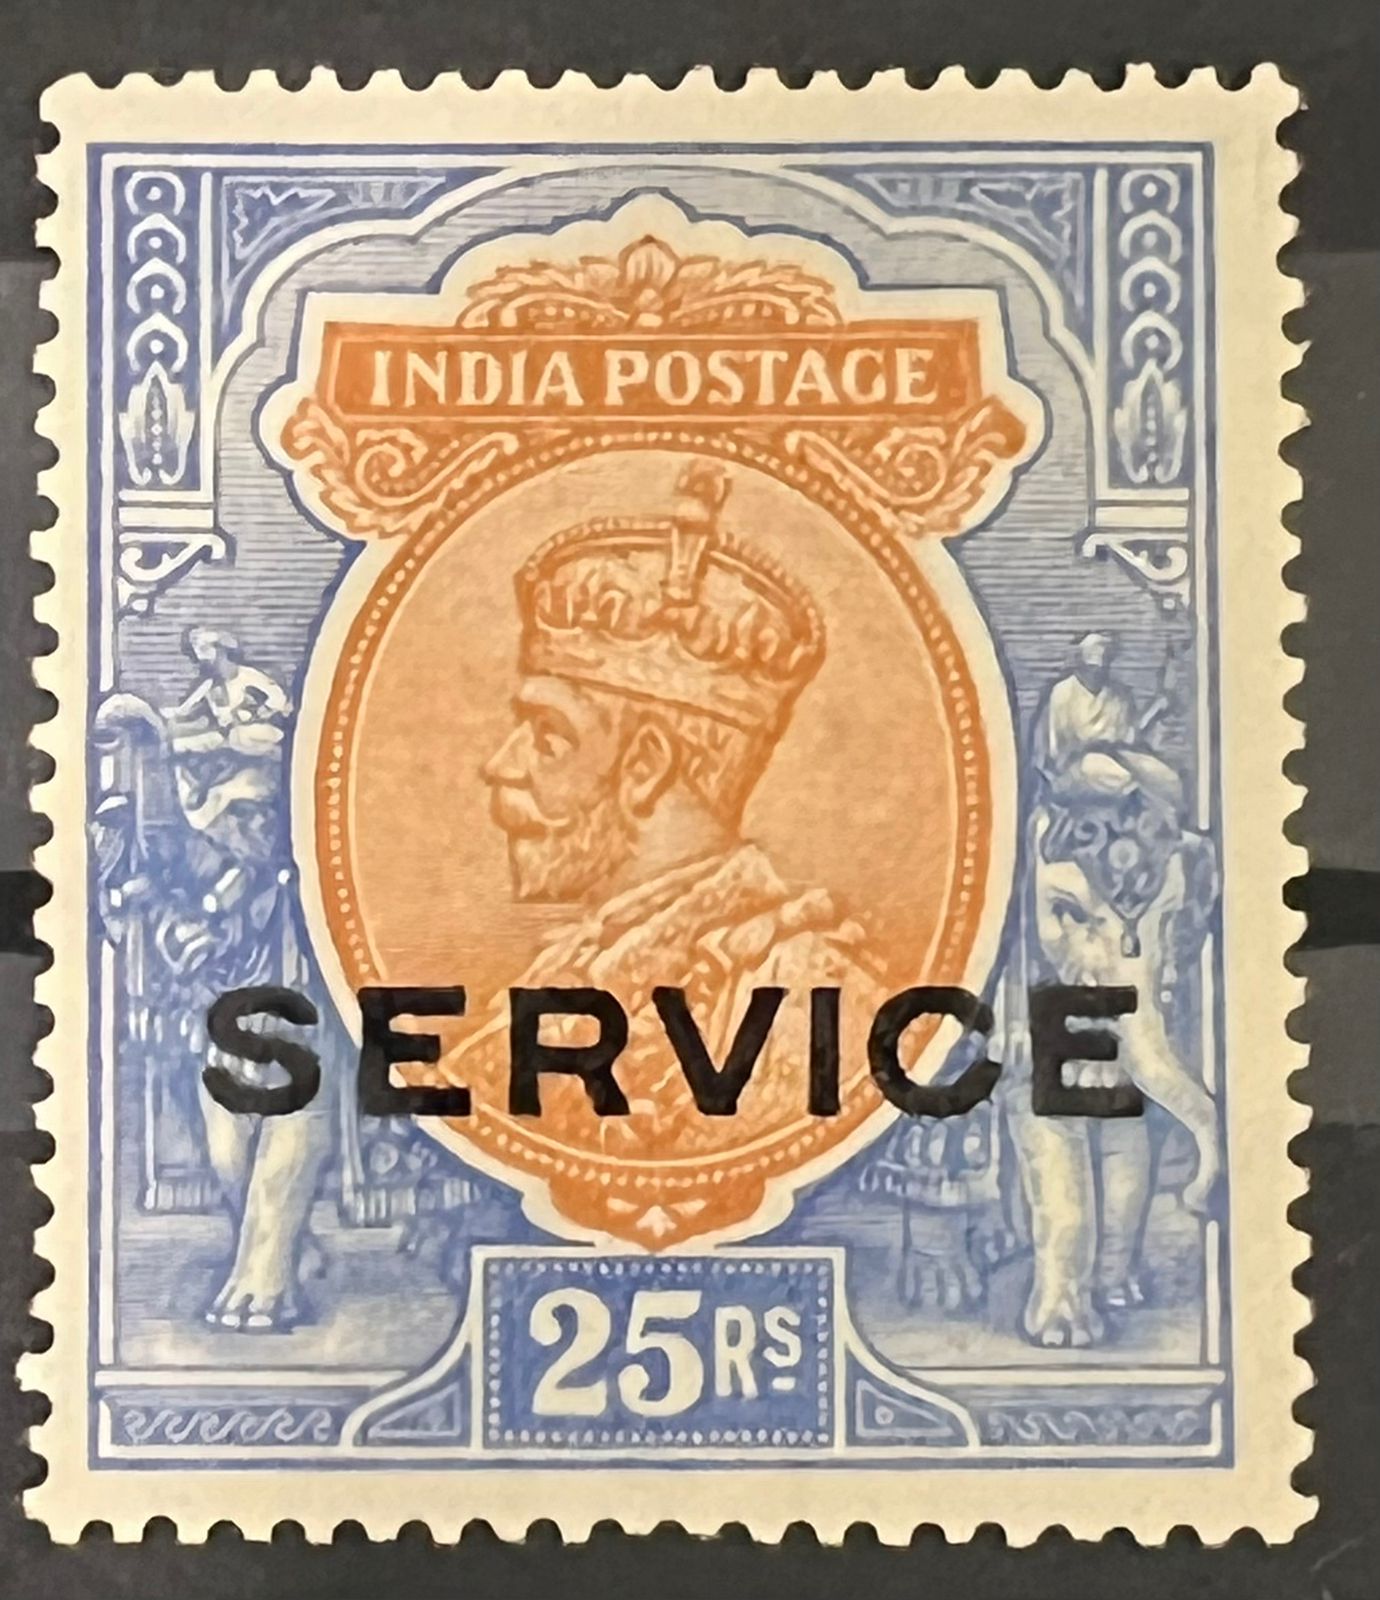 India 1913 KGV Service Single Star Wmk 25Rs ESSAY  " Shiny Ink Overprint " without Gum as issued Rare